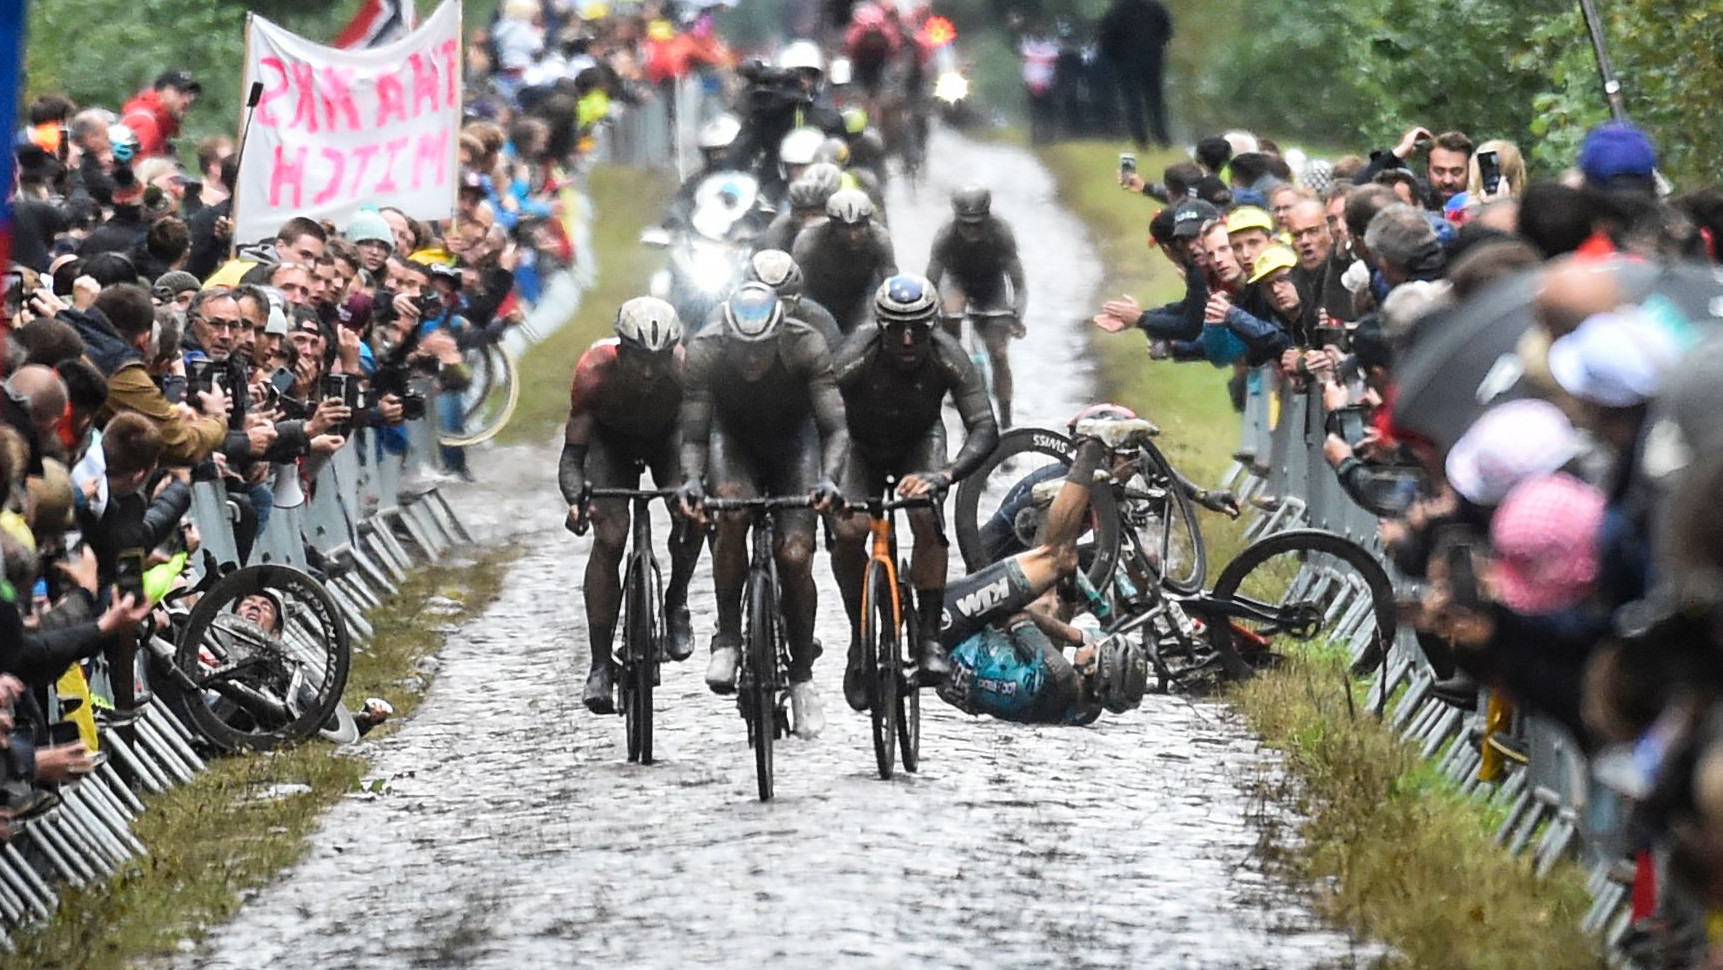 Paris-Roubaix live stream 2022 how to watch the cycling for free, online and on TV What Hi-Fi?